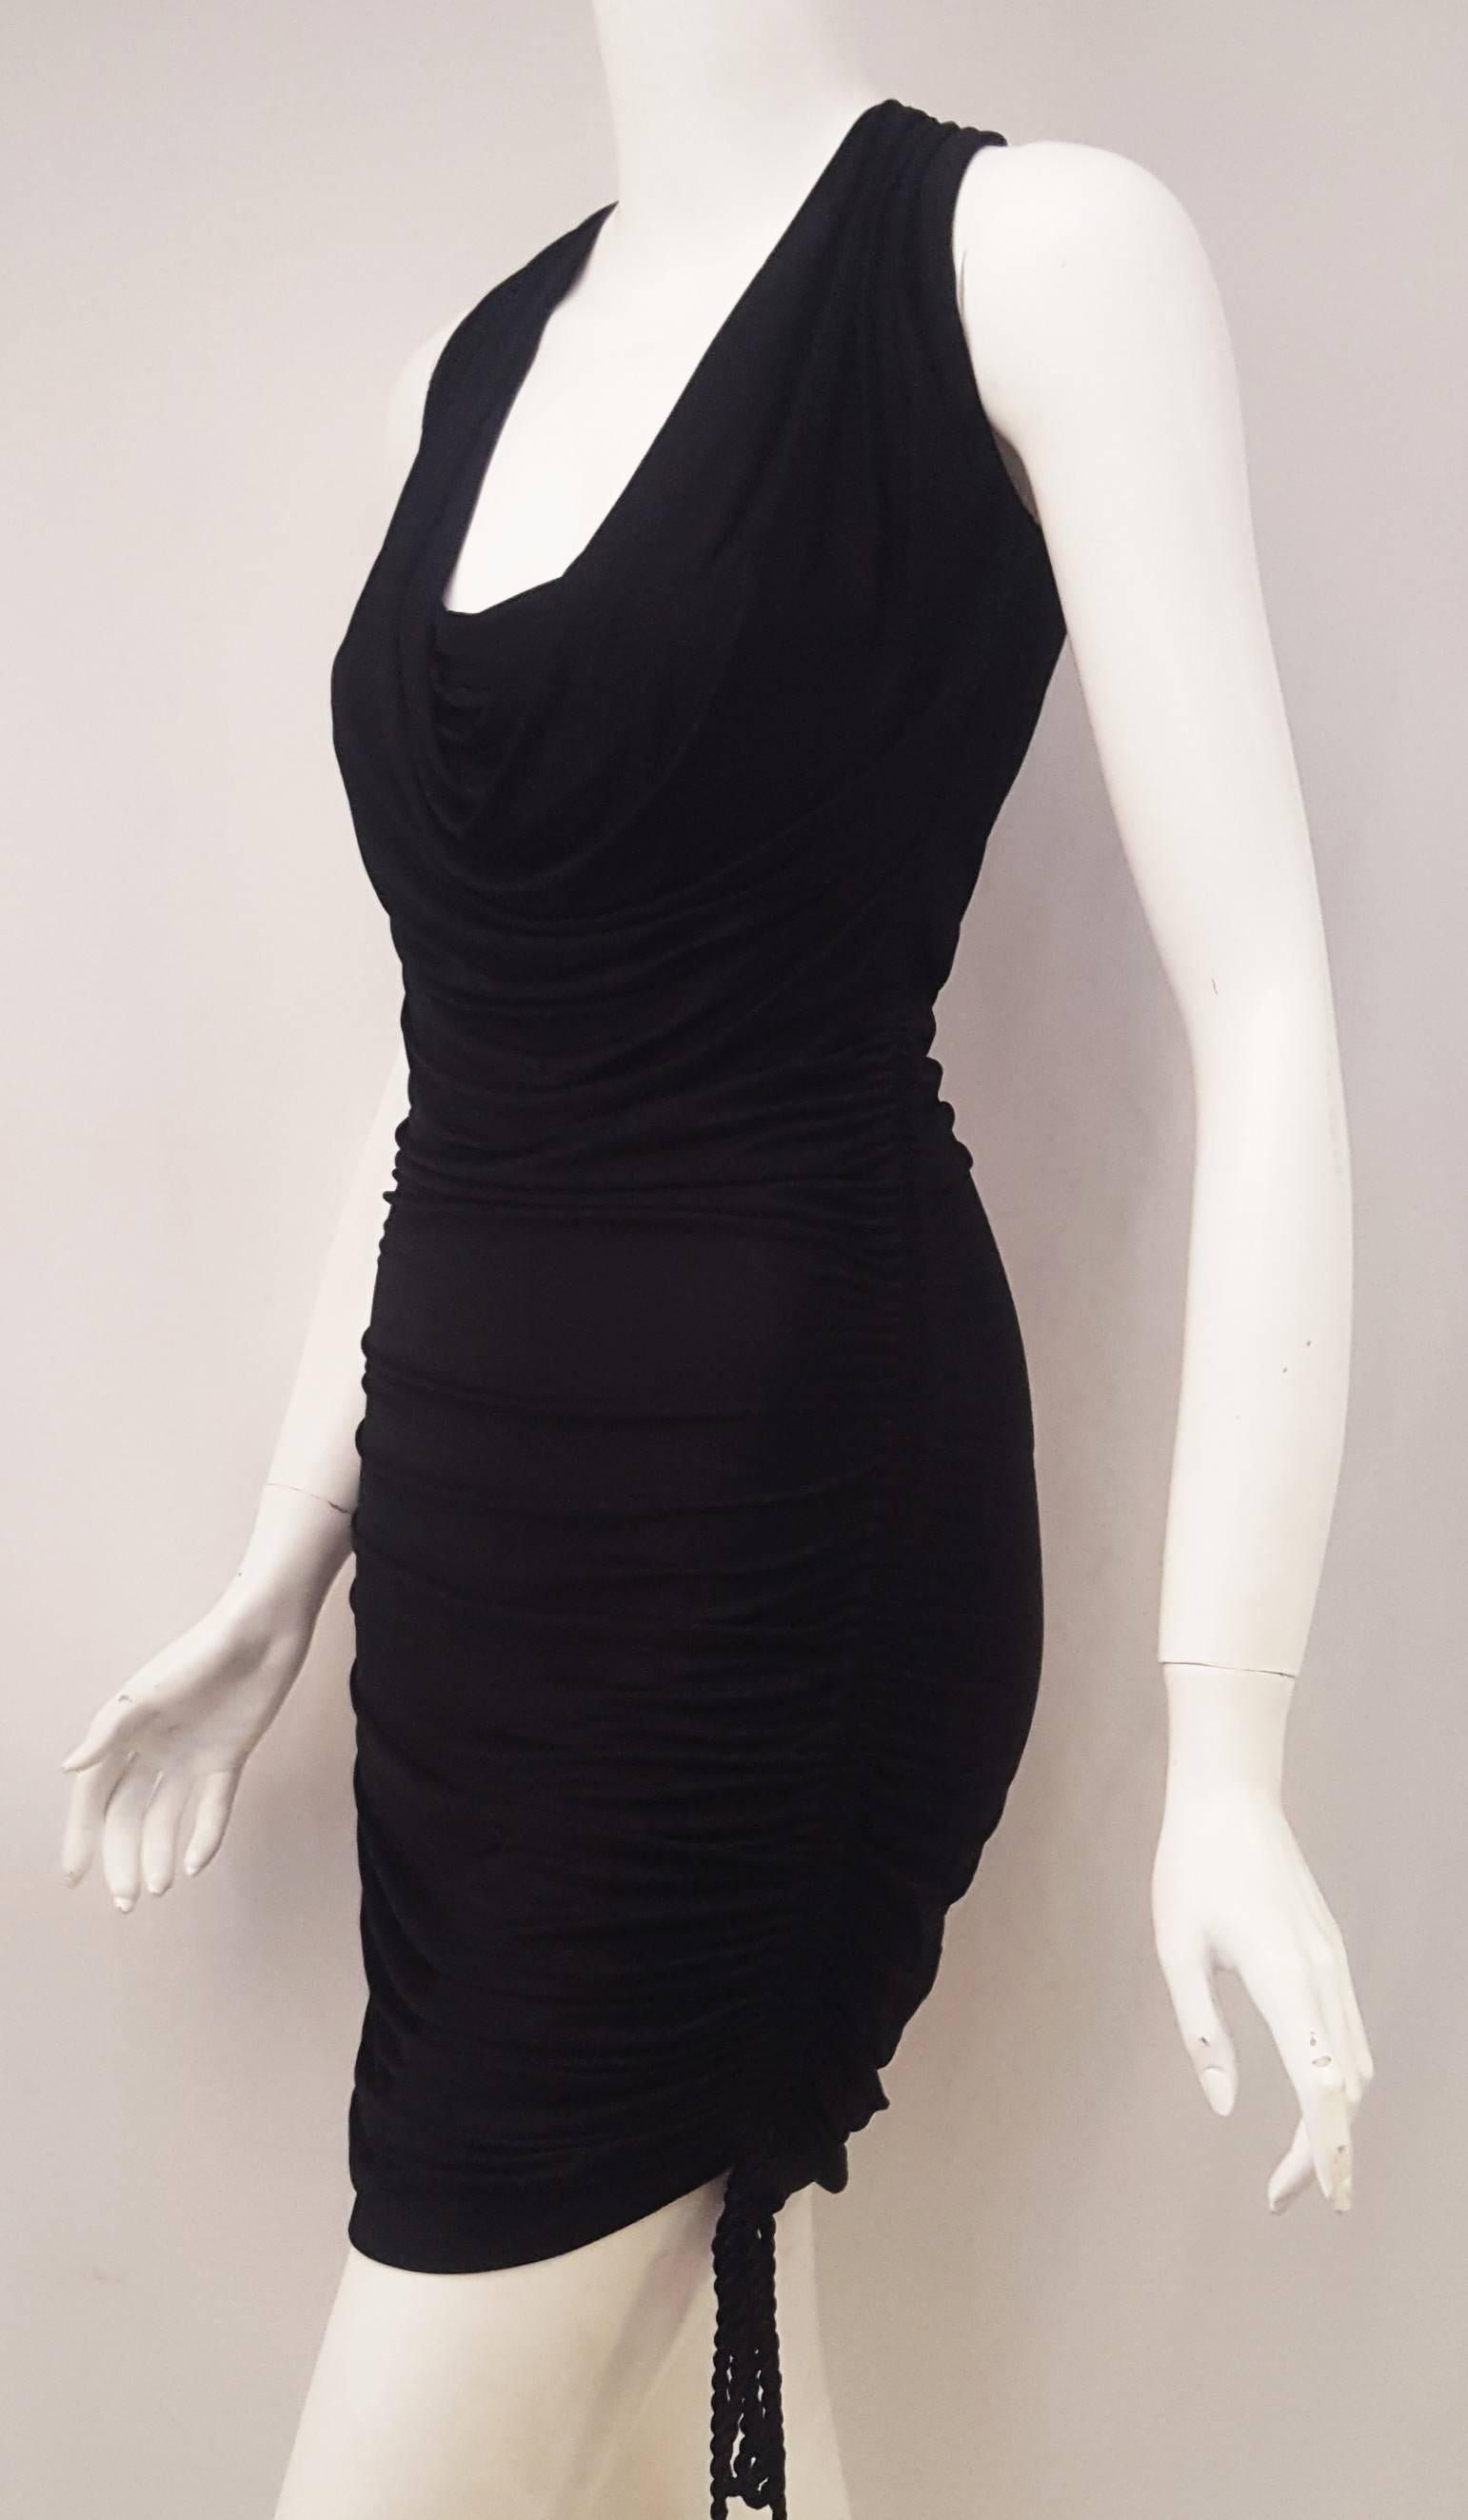 Roberto Cavalli black knit viscose dress has a low scoop collar that can be gathered from just below the bust to the hem by cords at each side to become a mini or midi dress.  This Roberto Cavalli unlined dress brings sexy back!  Dress it up or